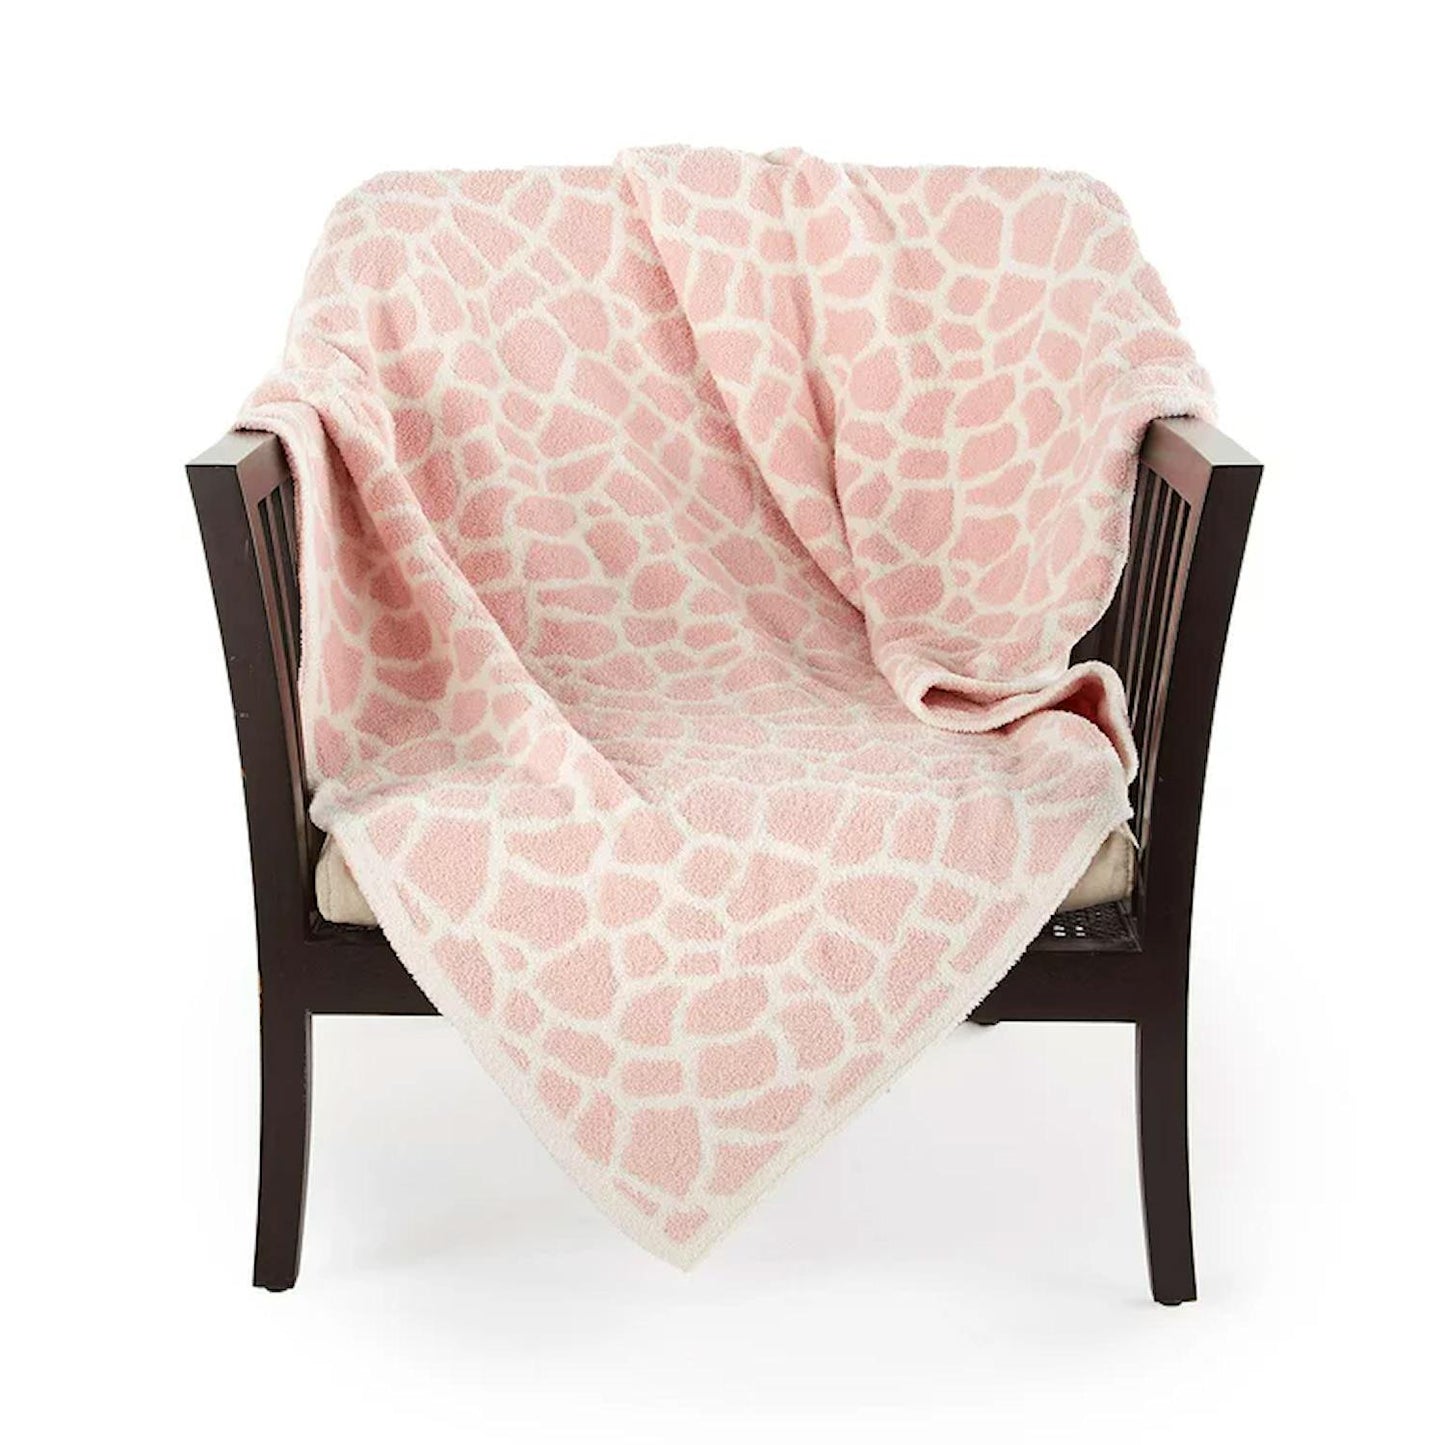 Crafted by Catherine 60x70 Cozy Knit Throw in Giraffe Pink